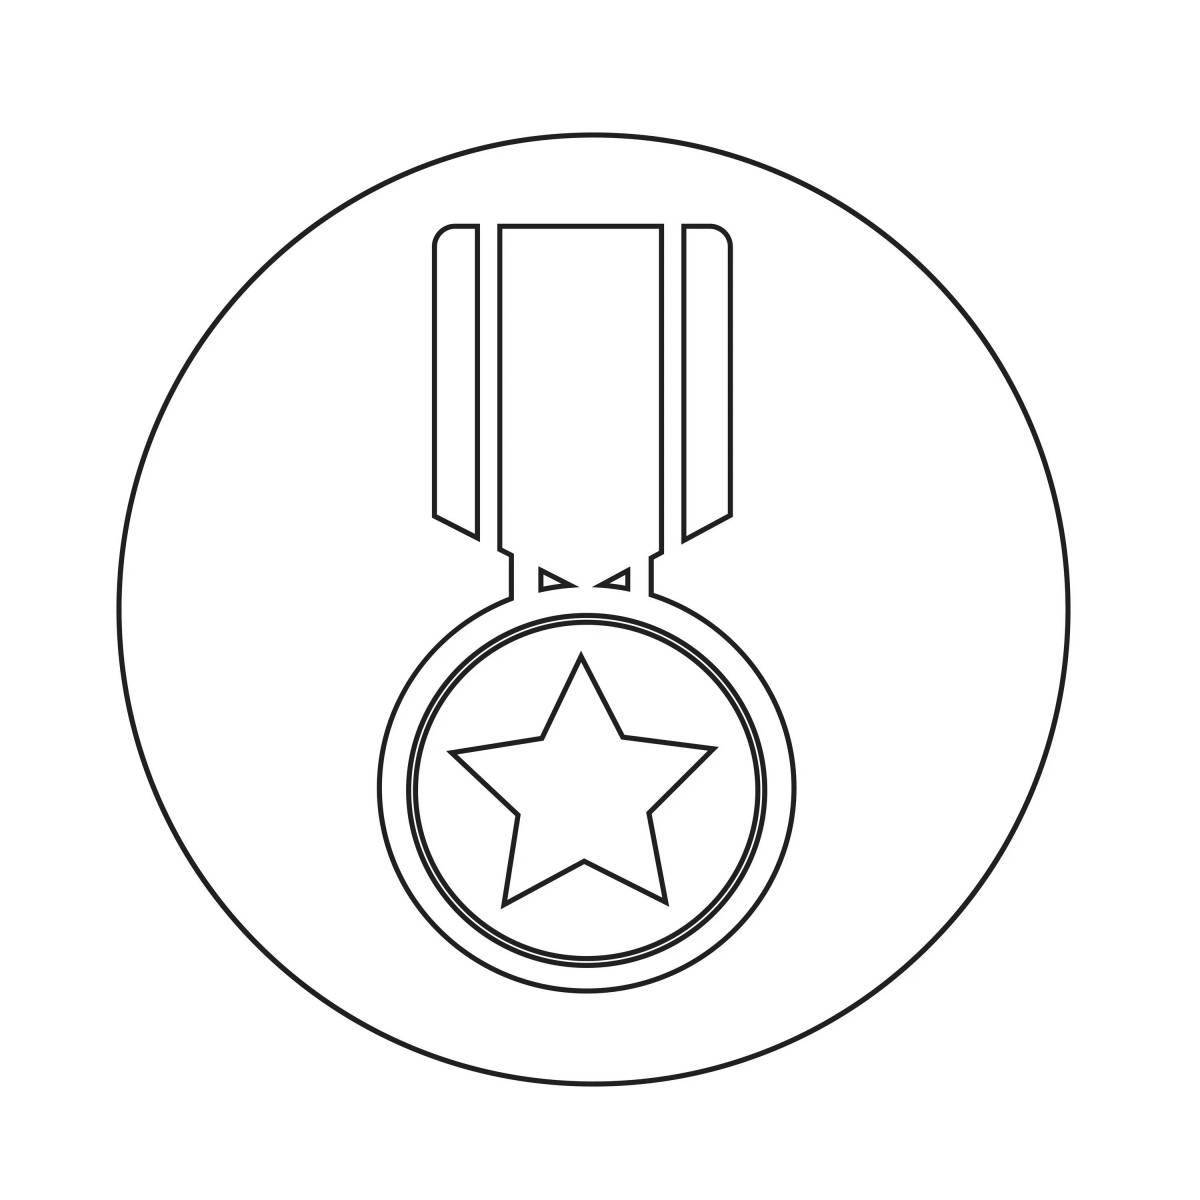 Glowing medal template for February 23rd